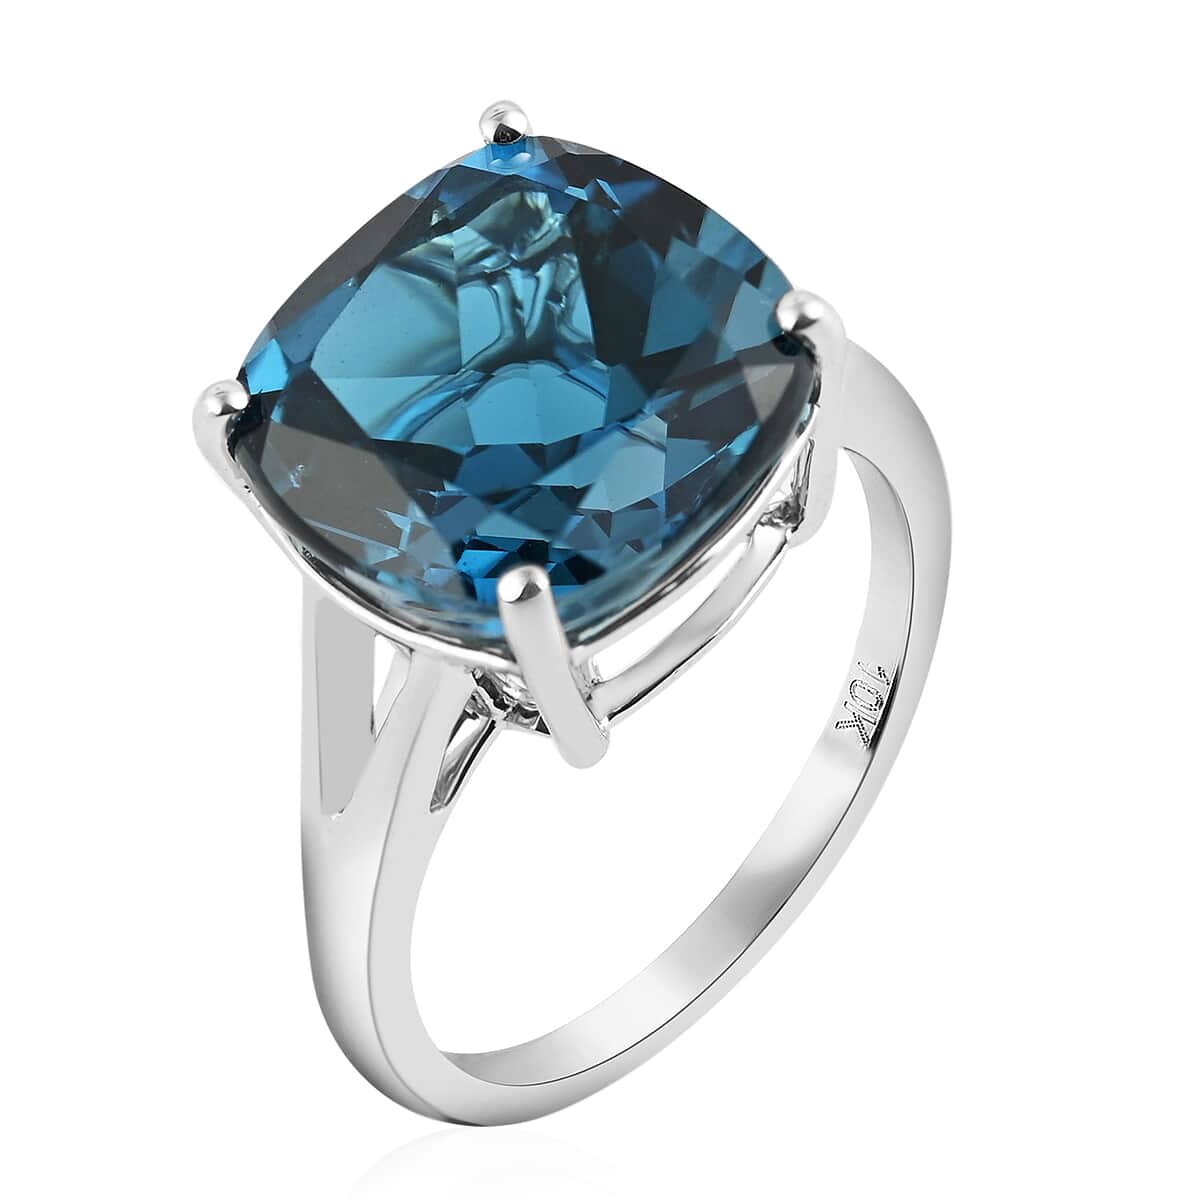 LUXORO 10K White Gold AAA London Blue Topaz Solitaire Ring 3.30 Grams 9.00 ctw image number 3